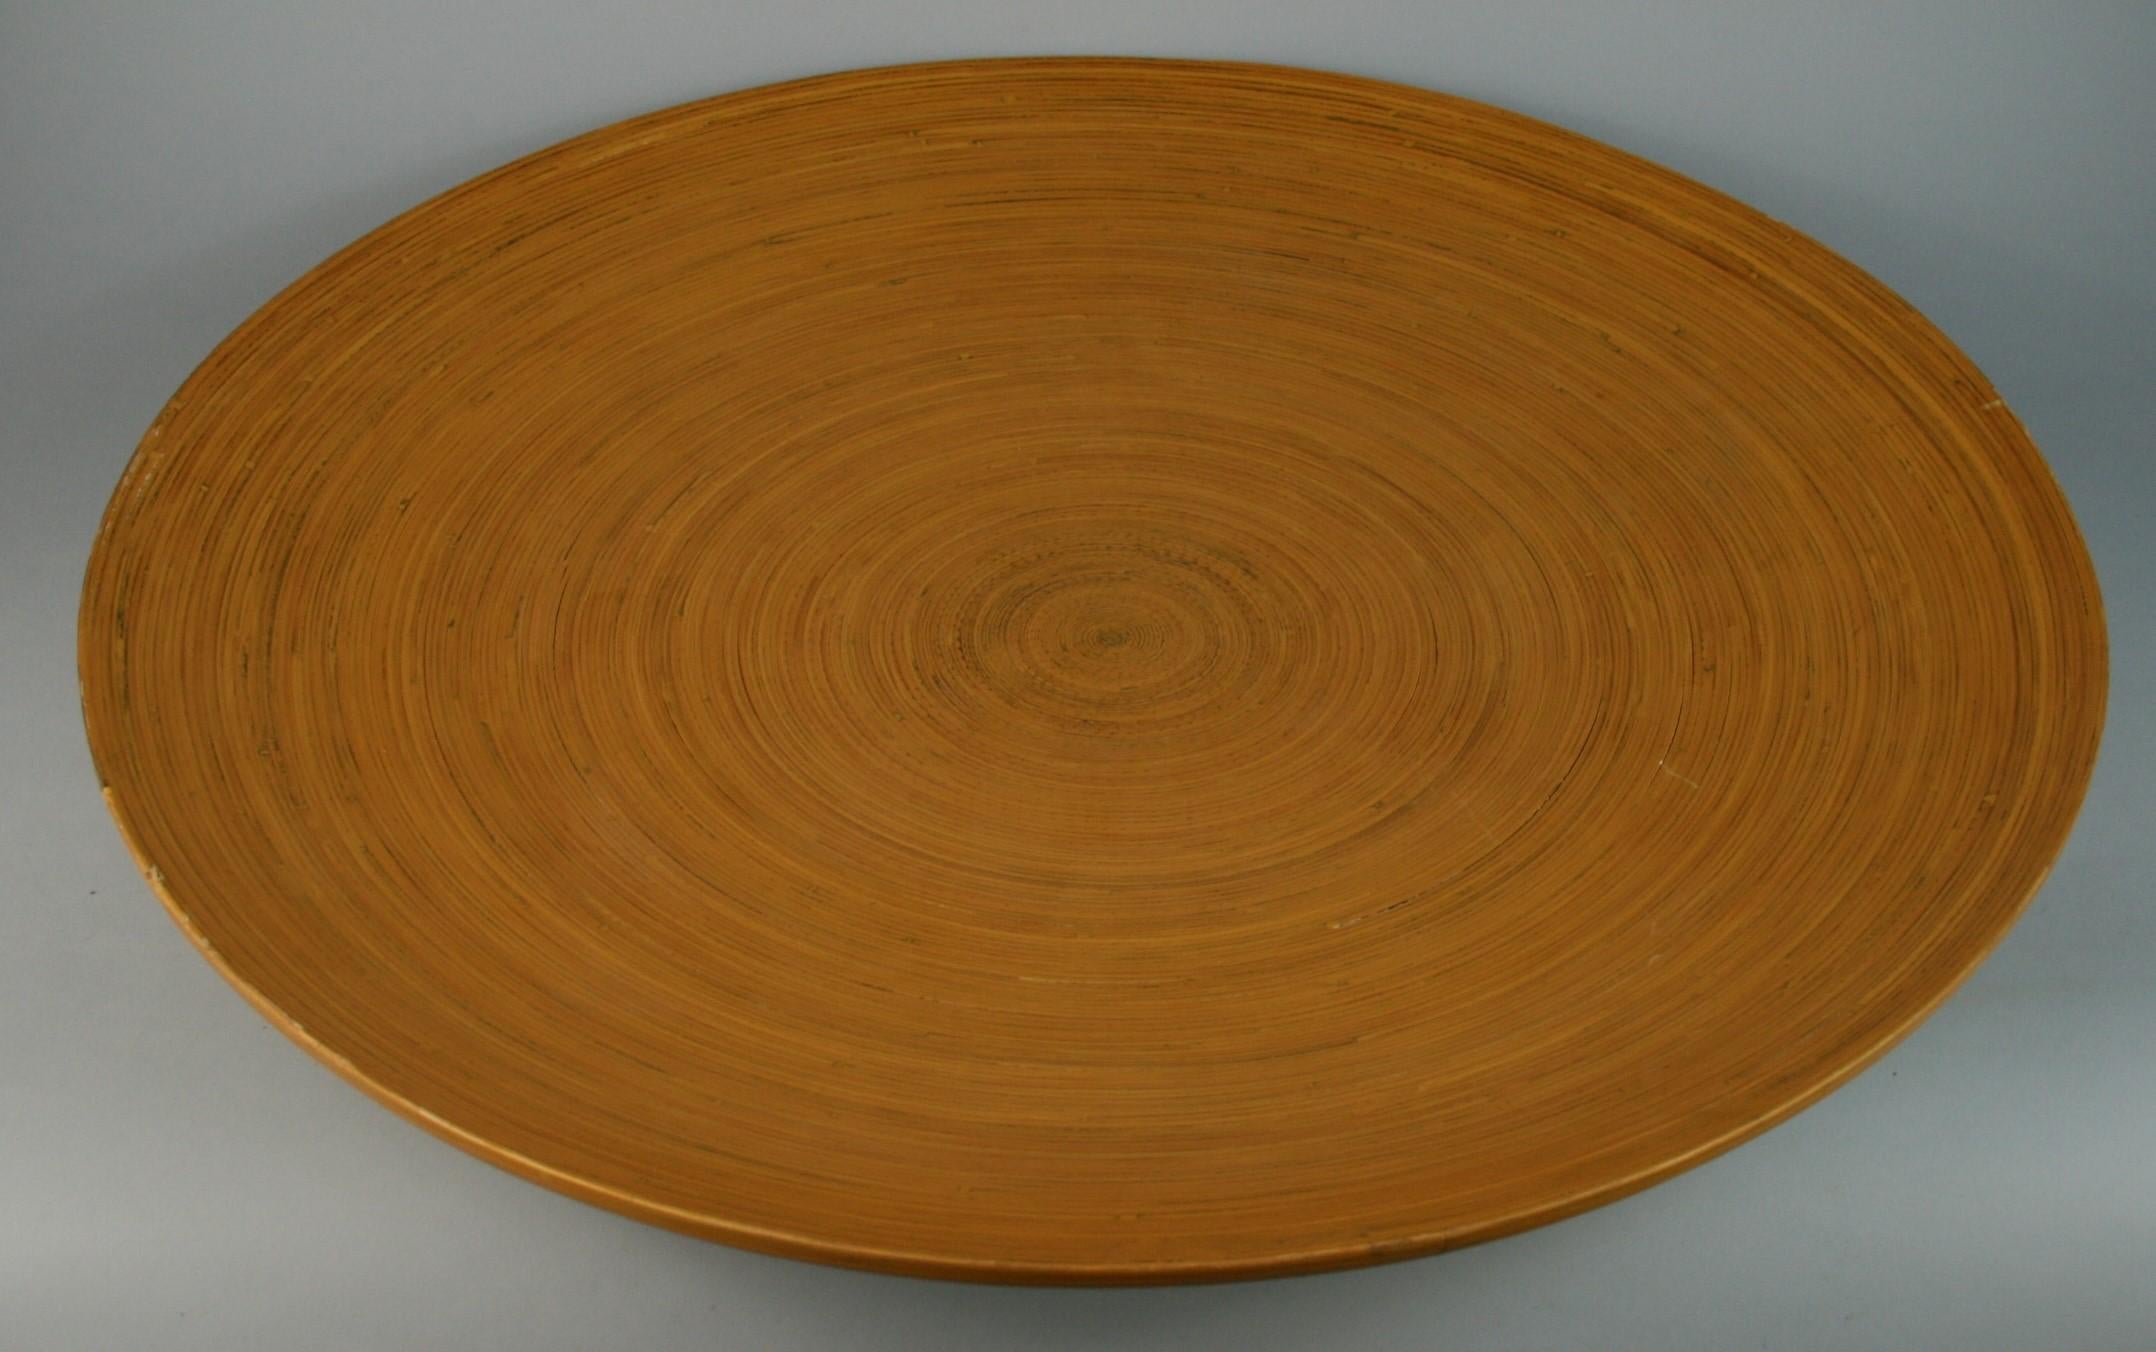 3-625 Japanese bamboo large platter on pedestal base.
This platter can be hung on wall as wall sculpture/decoration.